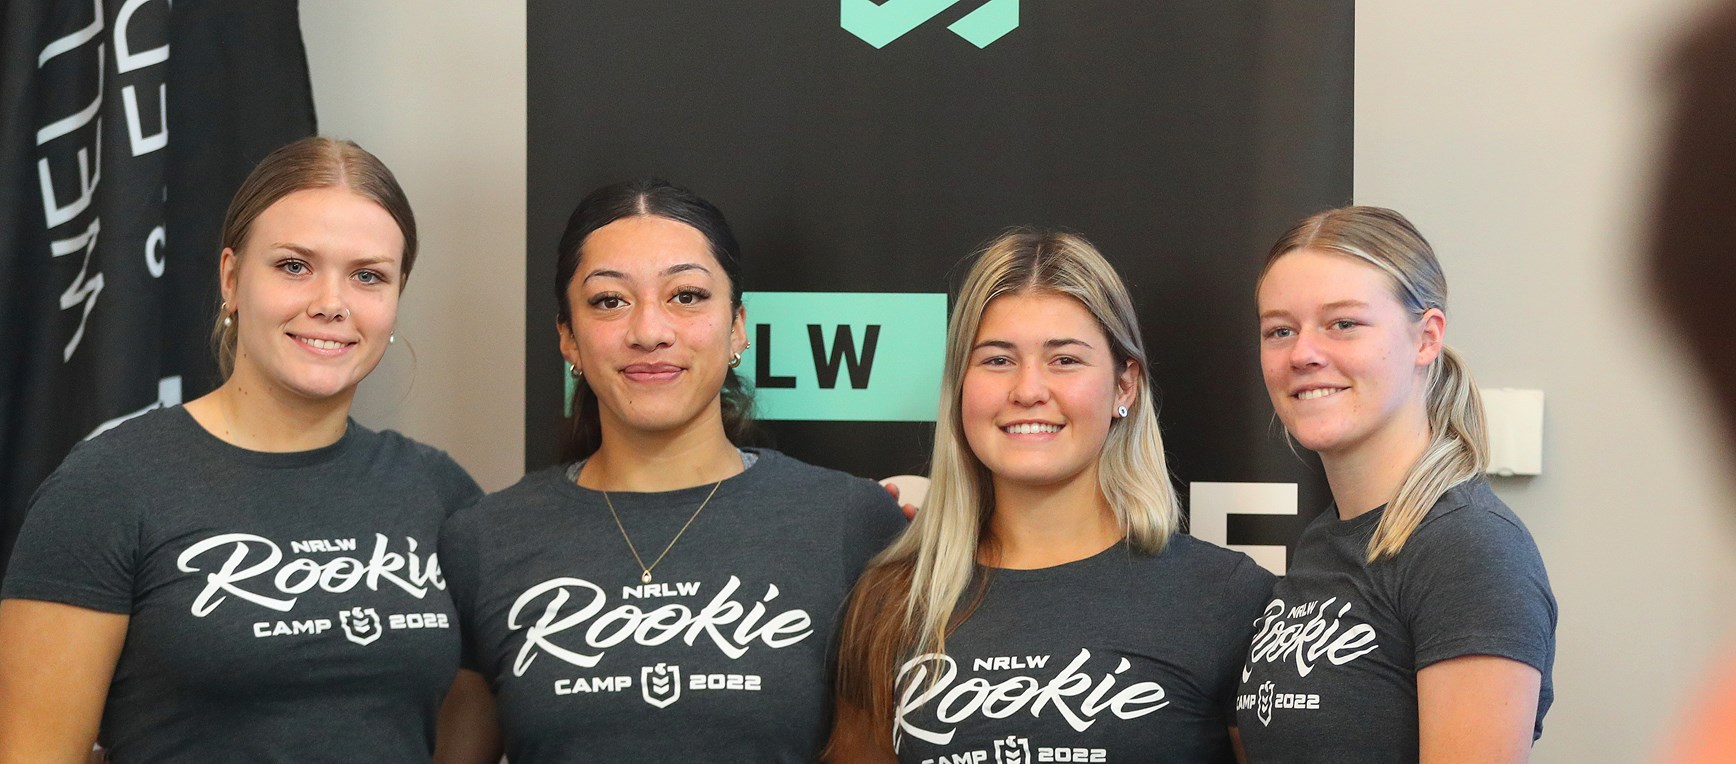 In pictures: NRLW Rookie Camp 2022